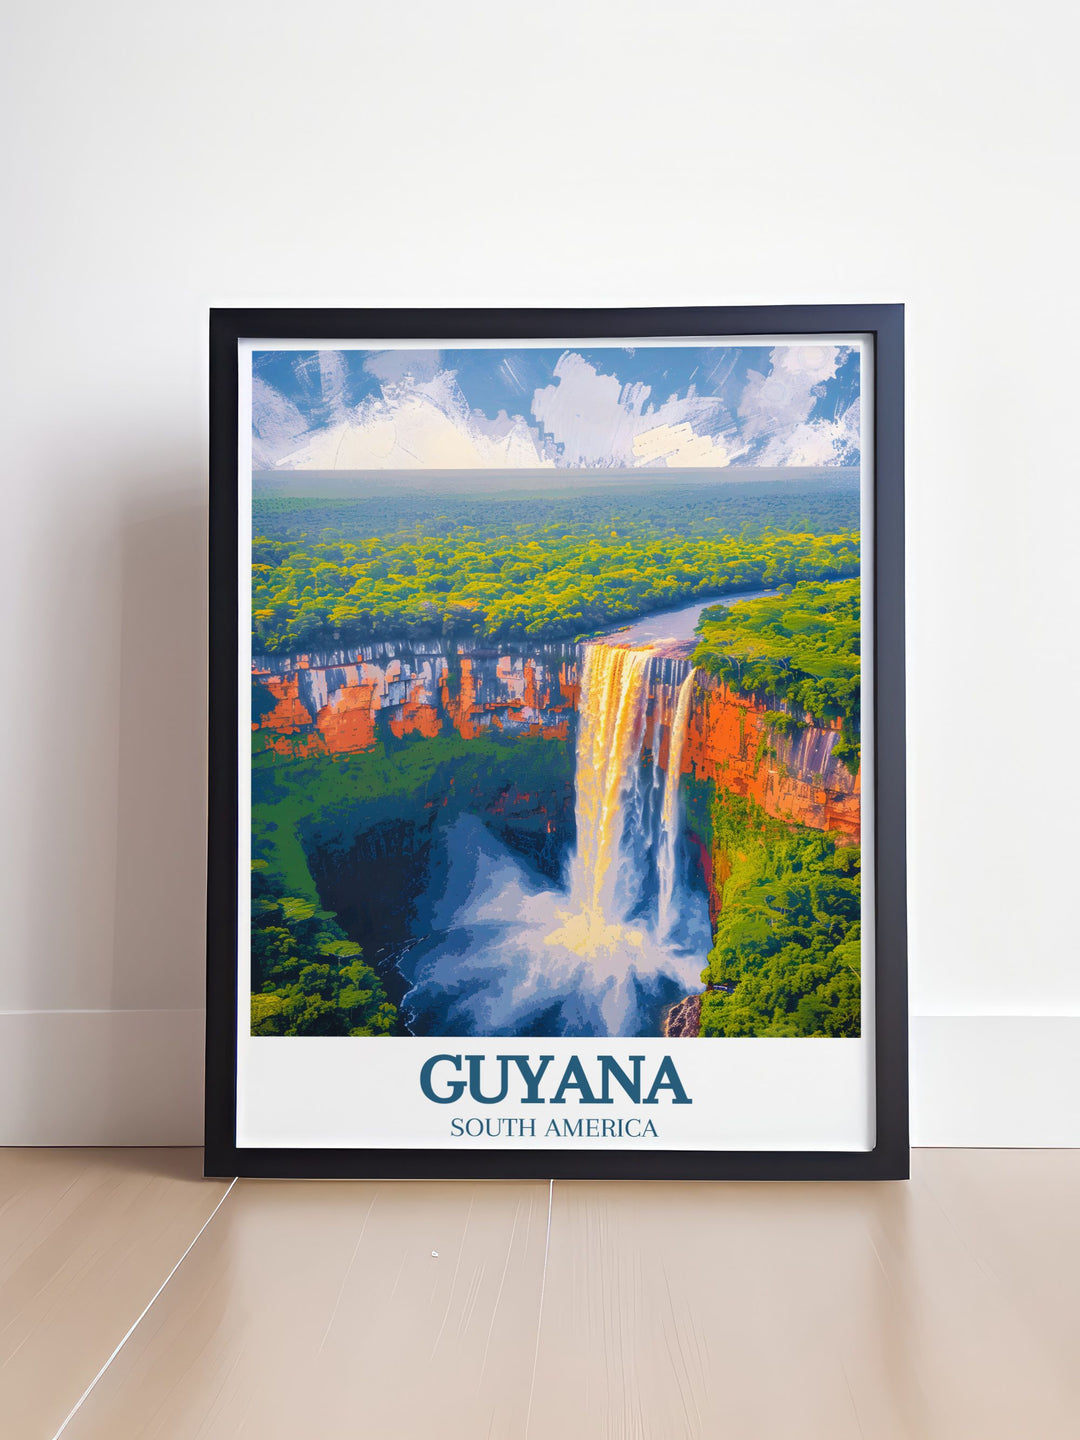 Highlighting the exotic wildlife and dense forests of the Amazon basin, this travel poster captures the adventurous spirit and captivating landscapes of Guyana, ideal for your home decor.